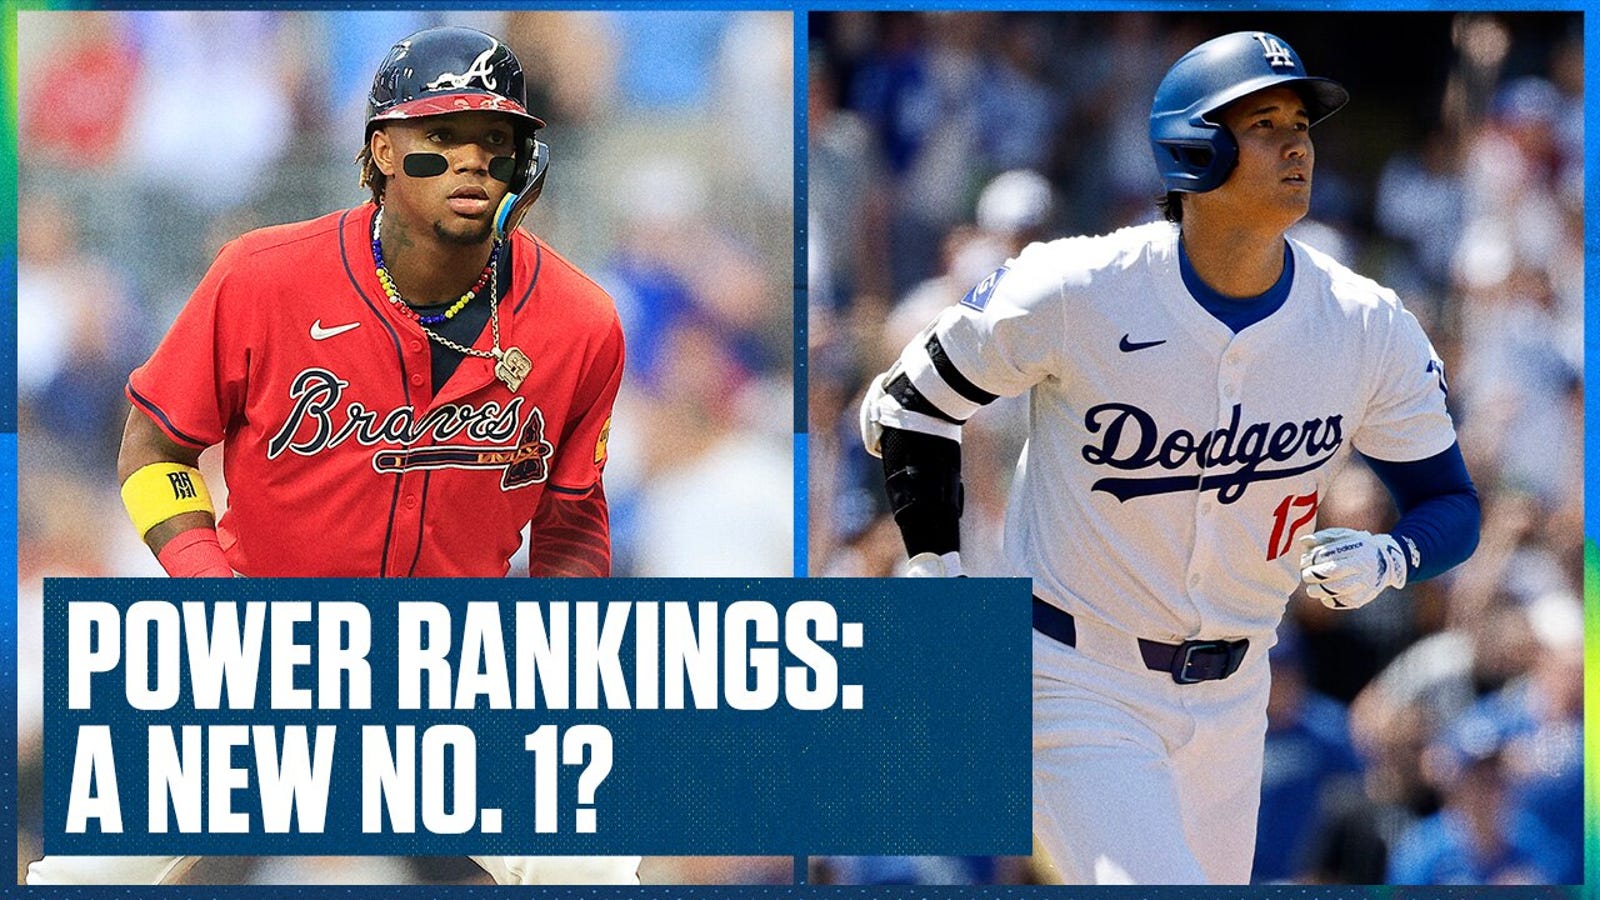 Who's the best team in baseball?